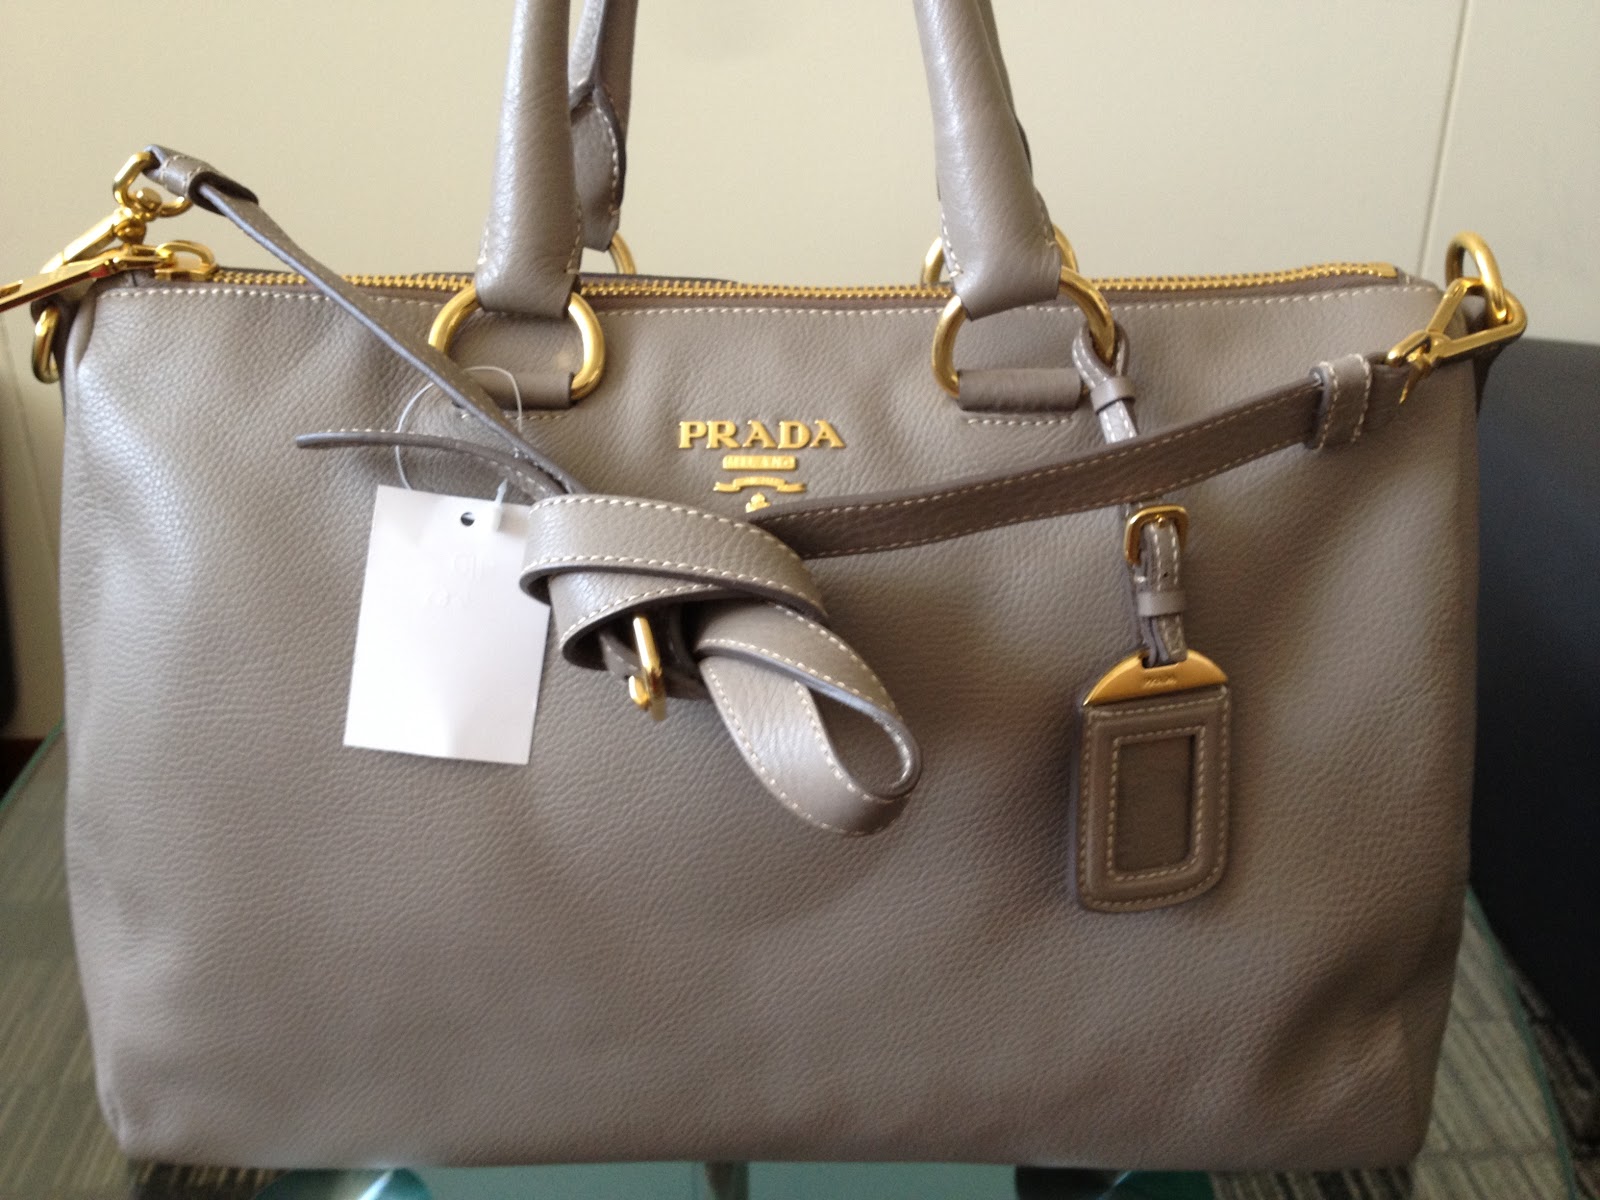 Where bag lovers meet ..AUTHENTIC designer bags for sale and rent: SOLD- Prada BL0778